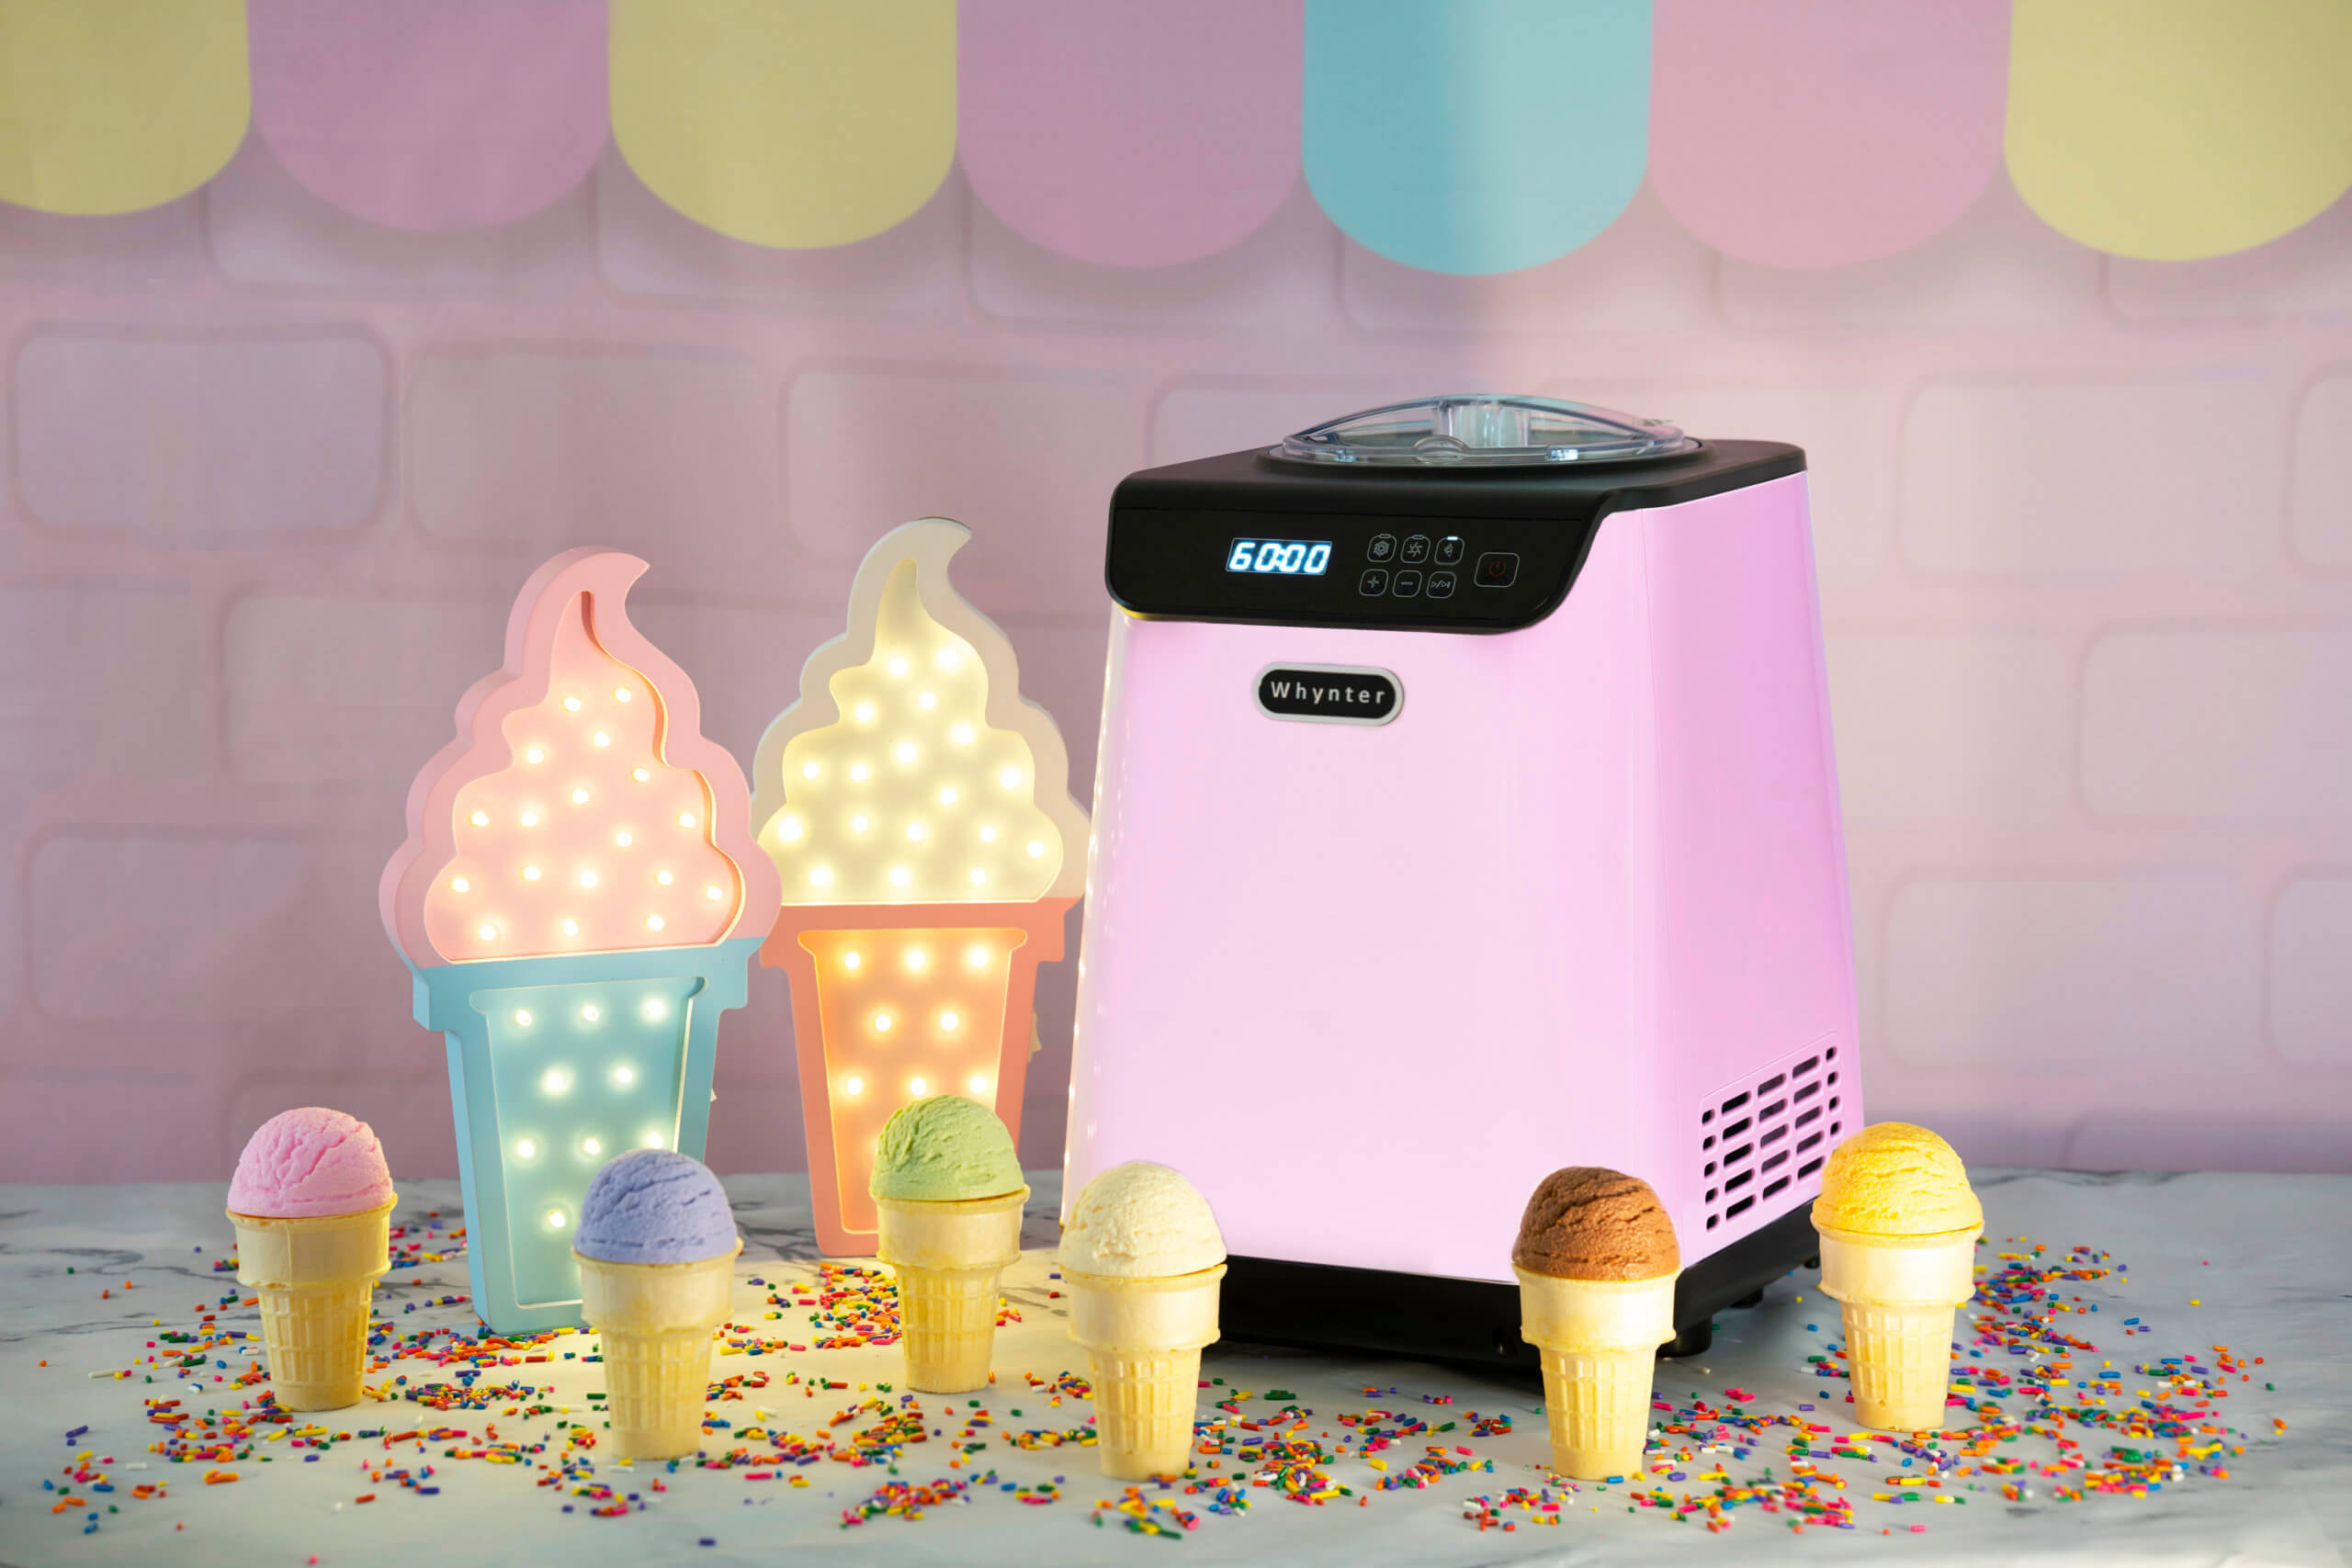 Ivation Automatic Ice Cream Maker Machine, No Pre-freezing Necessary with  Built-in Compressor, Stainless Steel Gelato Maker, LCD Screen, Digital